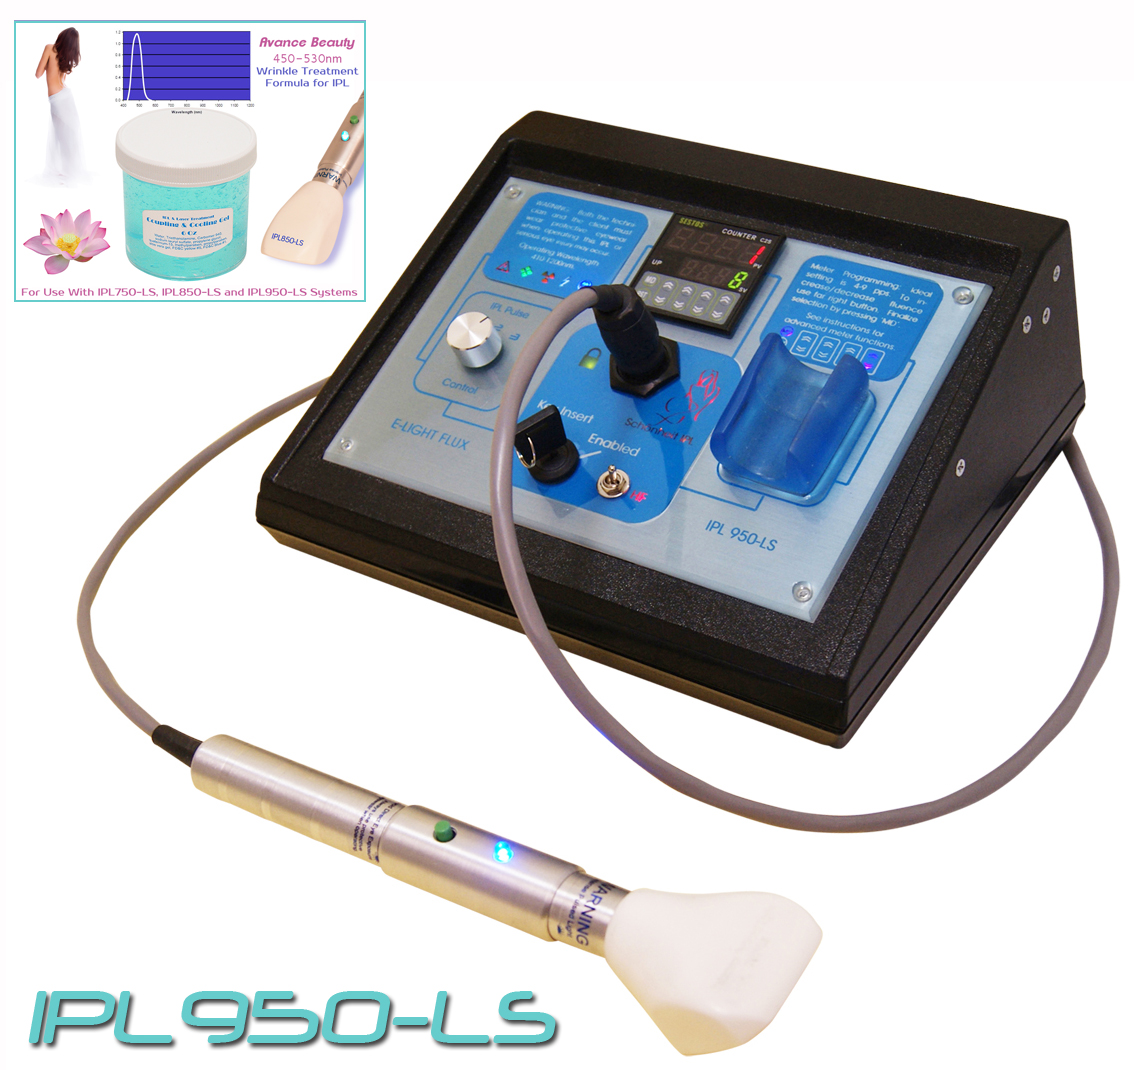 IPL950-LS Wrinkle Treatment Gel Kit 450-530nm with Beauty Treatment Machine, System, Device.  642057128612